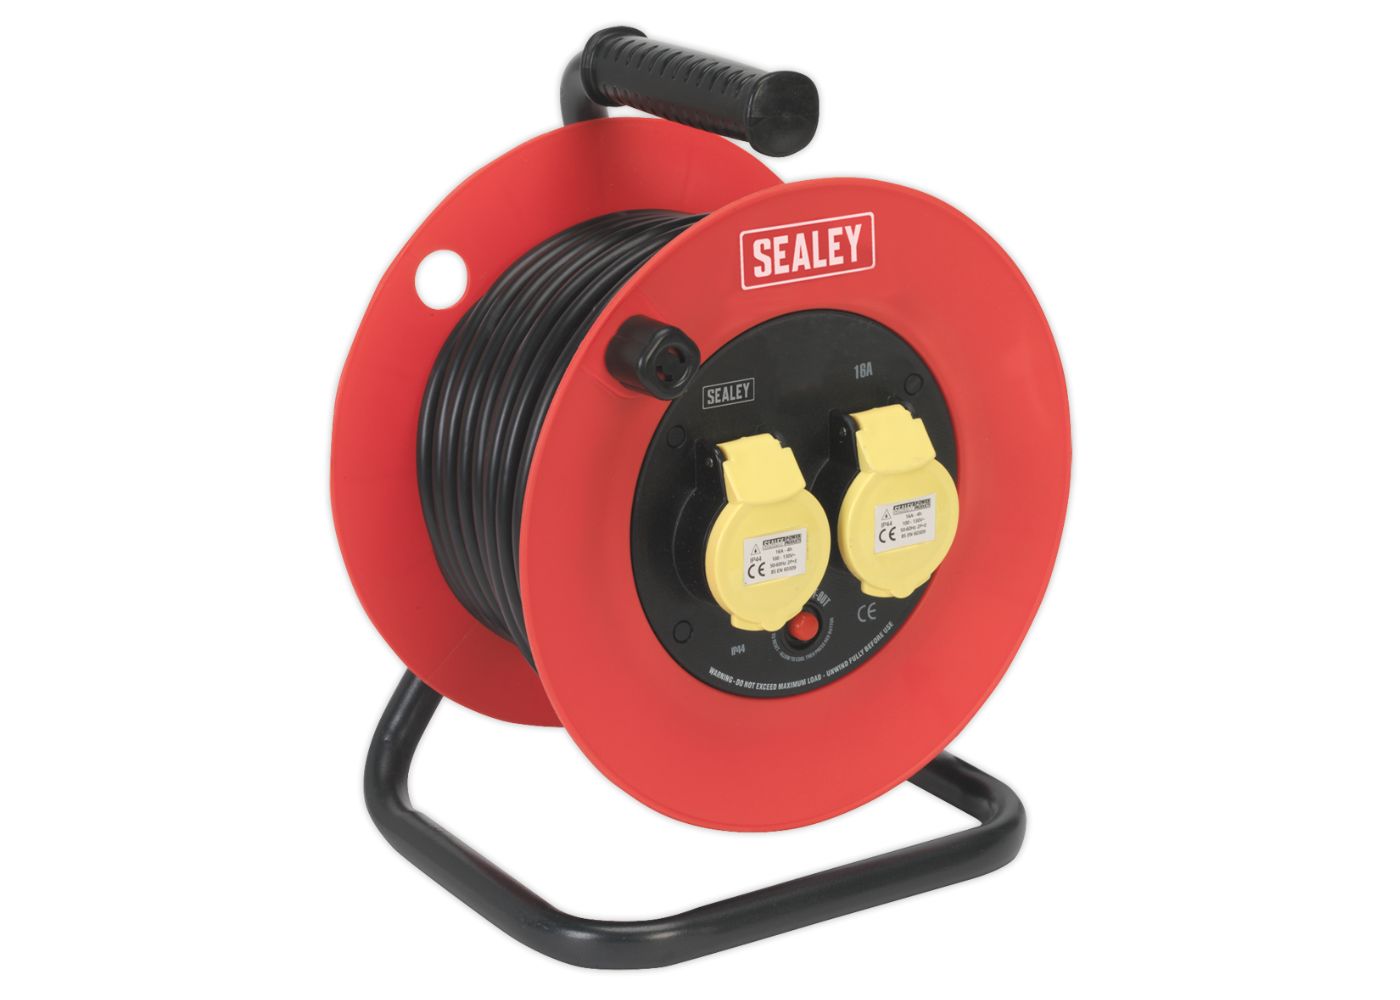 Retractable Extension Leads and Cable Reels - Buy Online